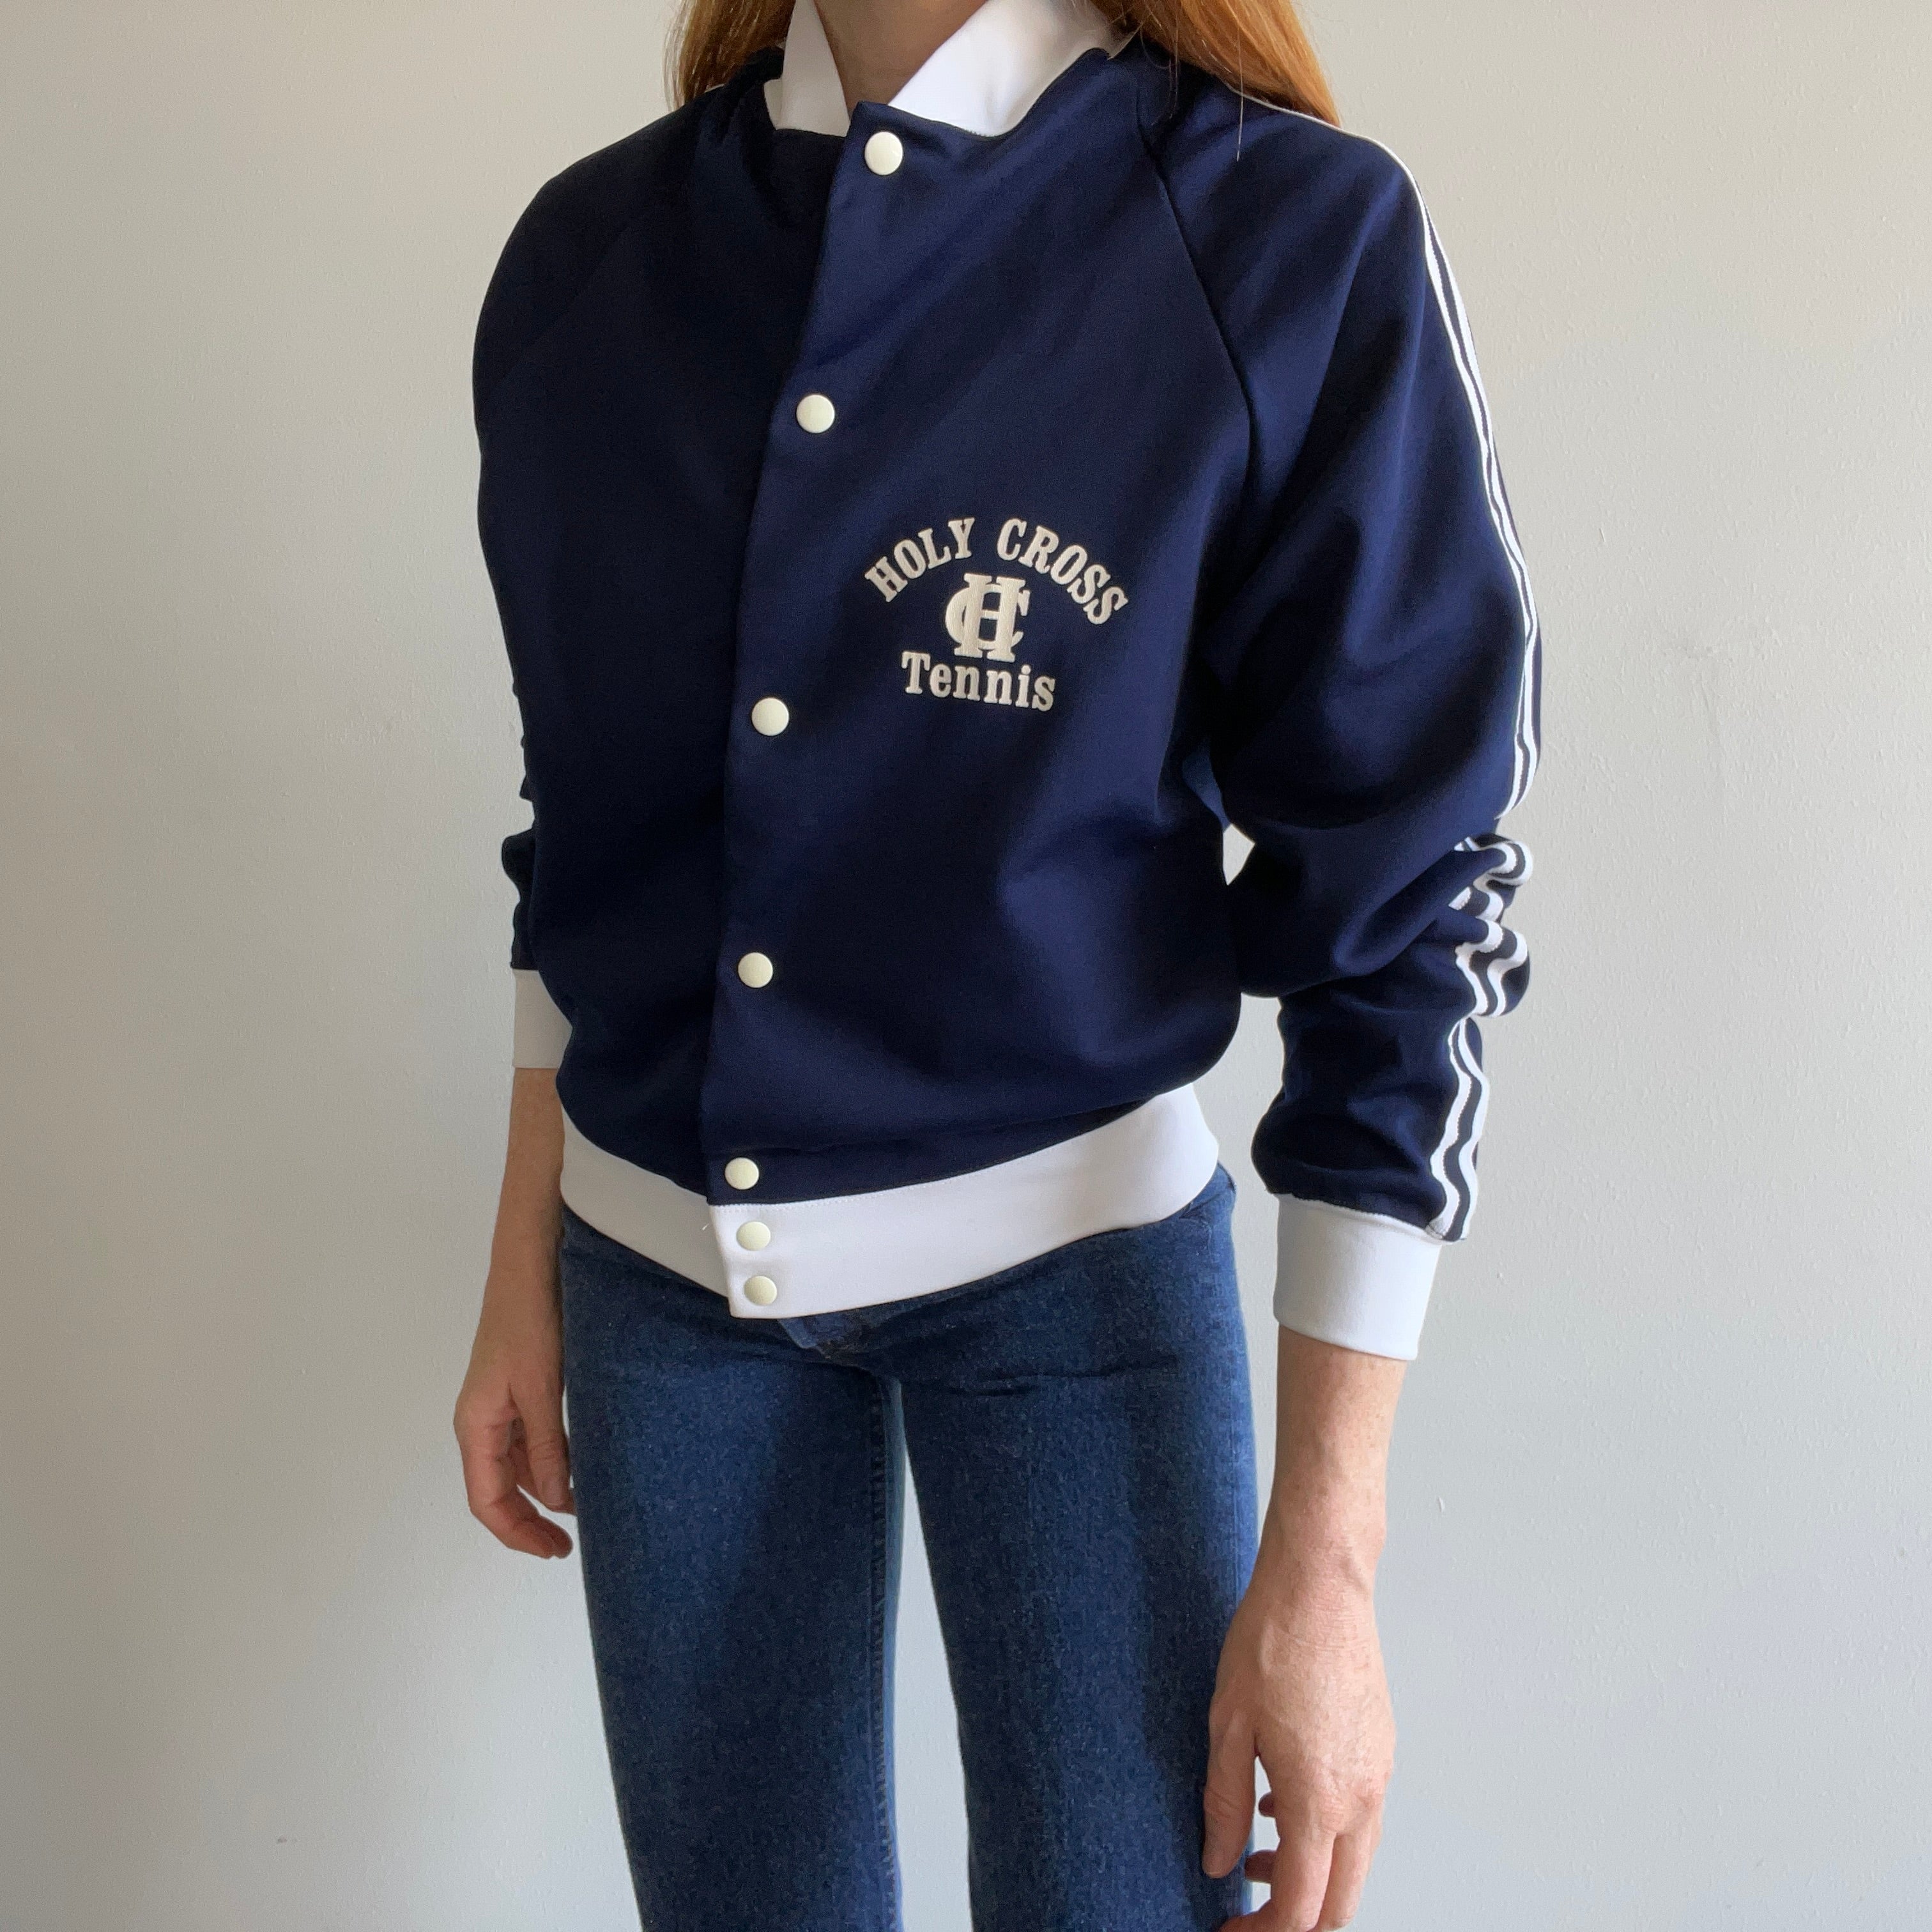 1970s Champion Brand Holy Cross Tennis Snap Up Jacket - Oh My!